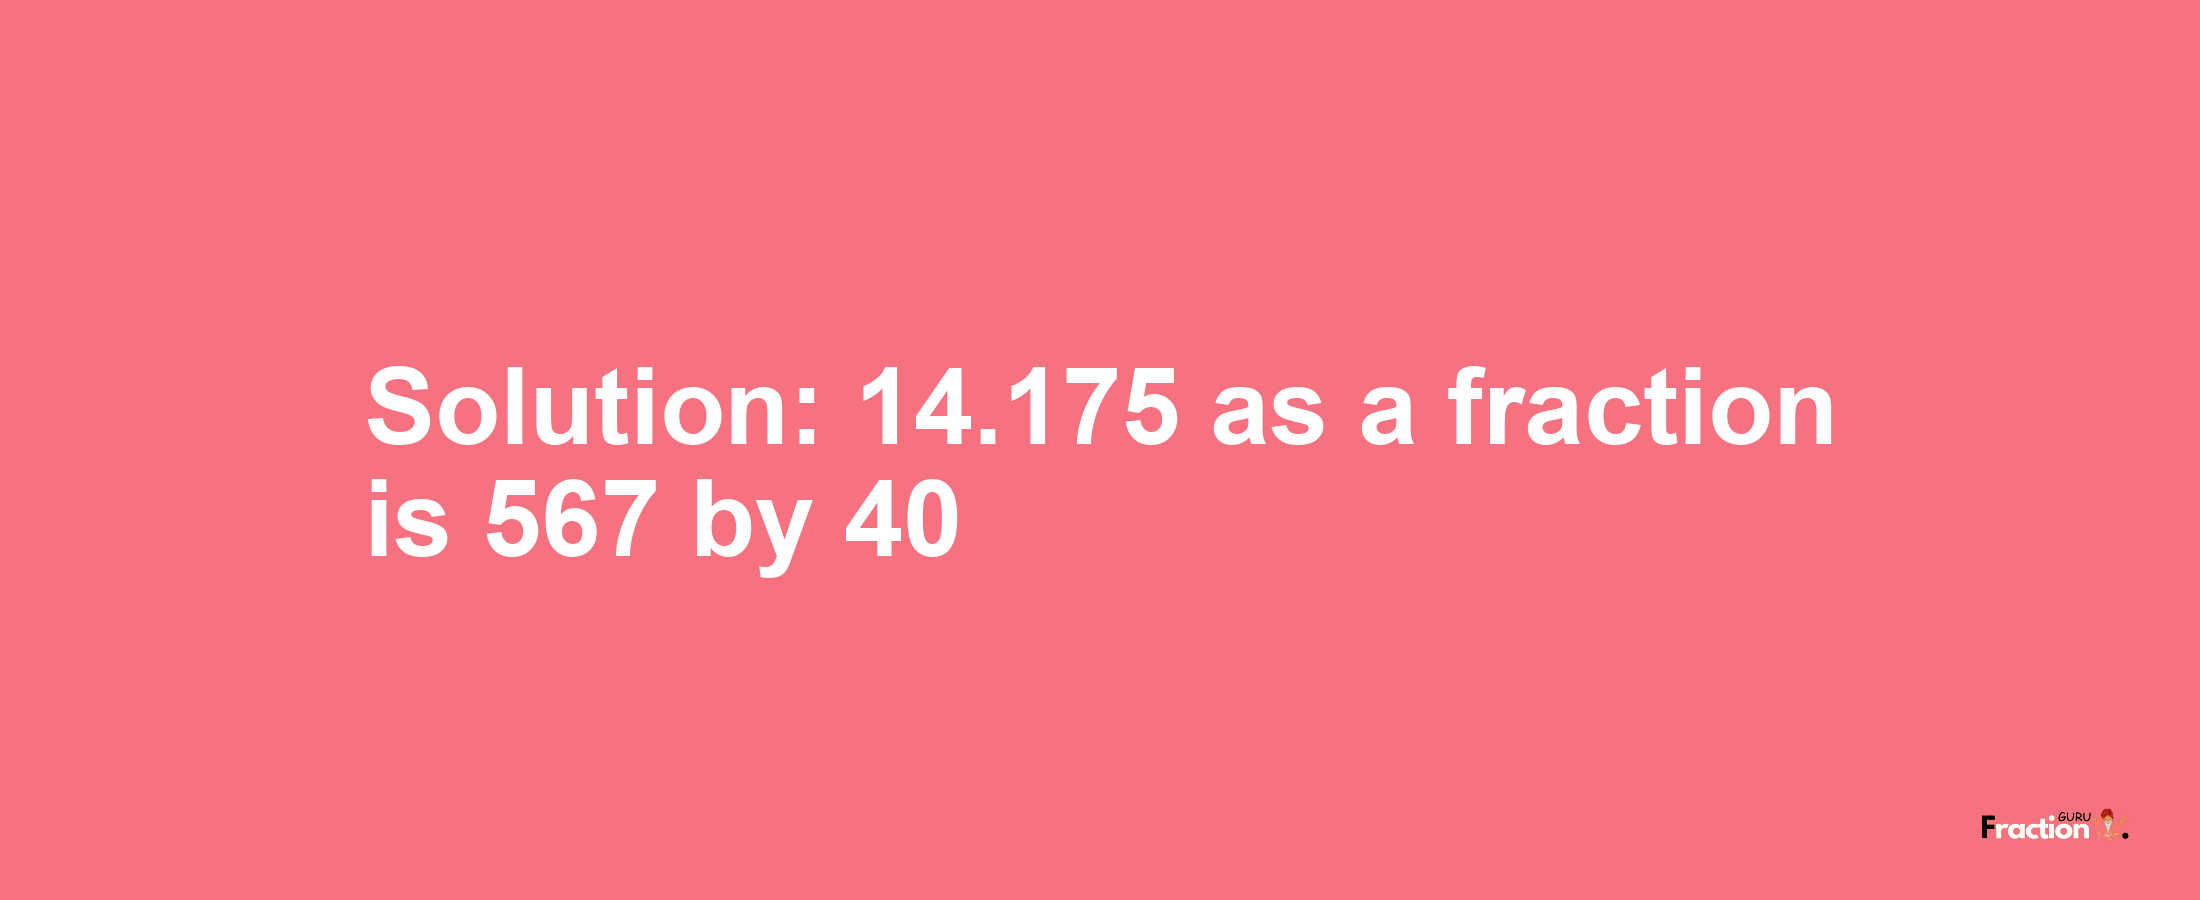 Solution:14.175 as a fraction is 567/40